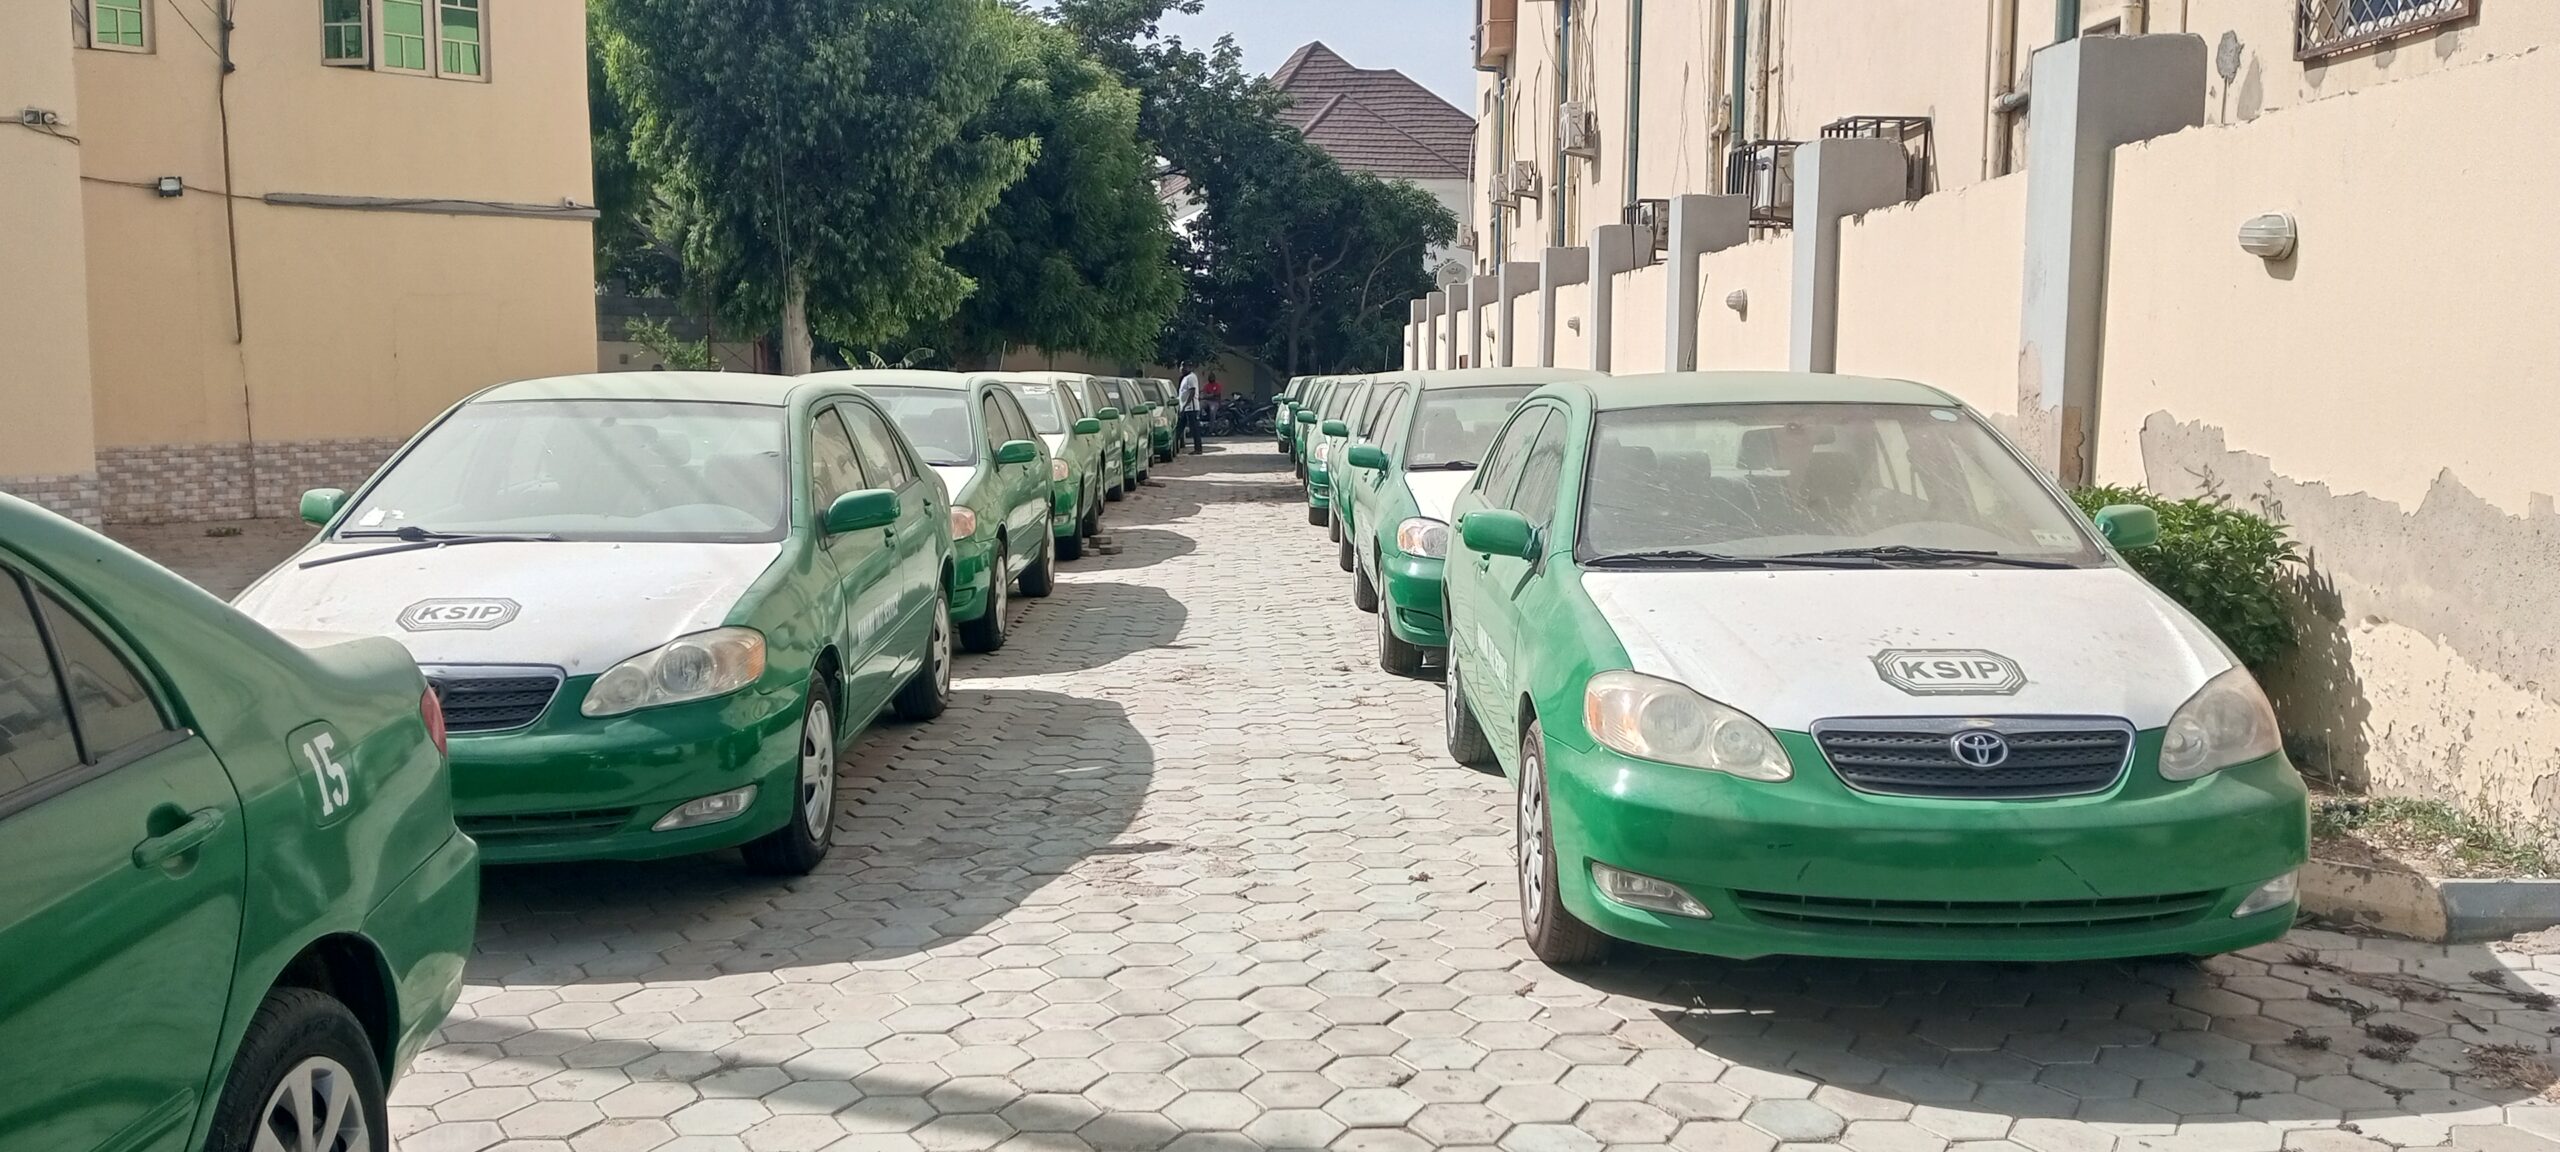 Hire purchased, police, KSIP, Cars, Buses, Kano, taxis